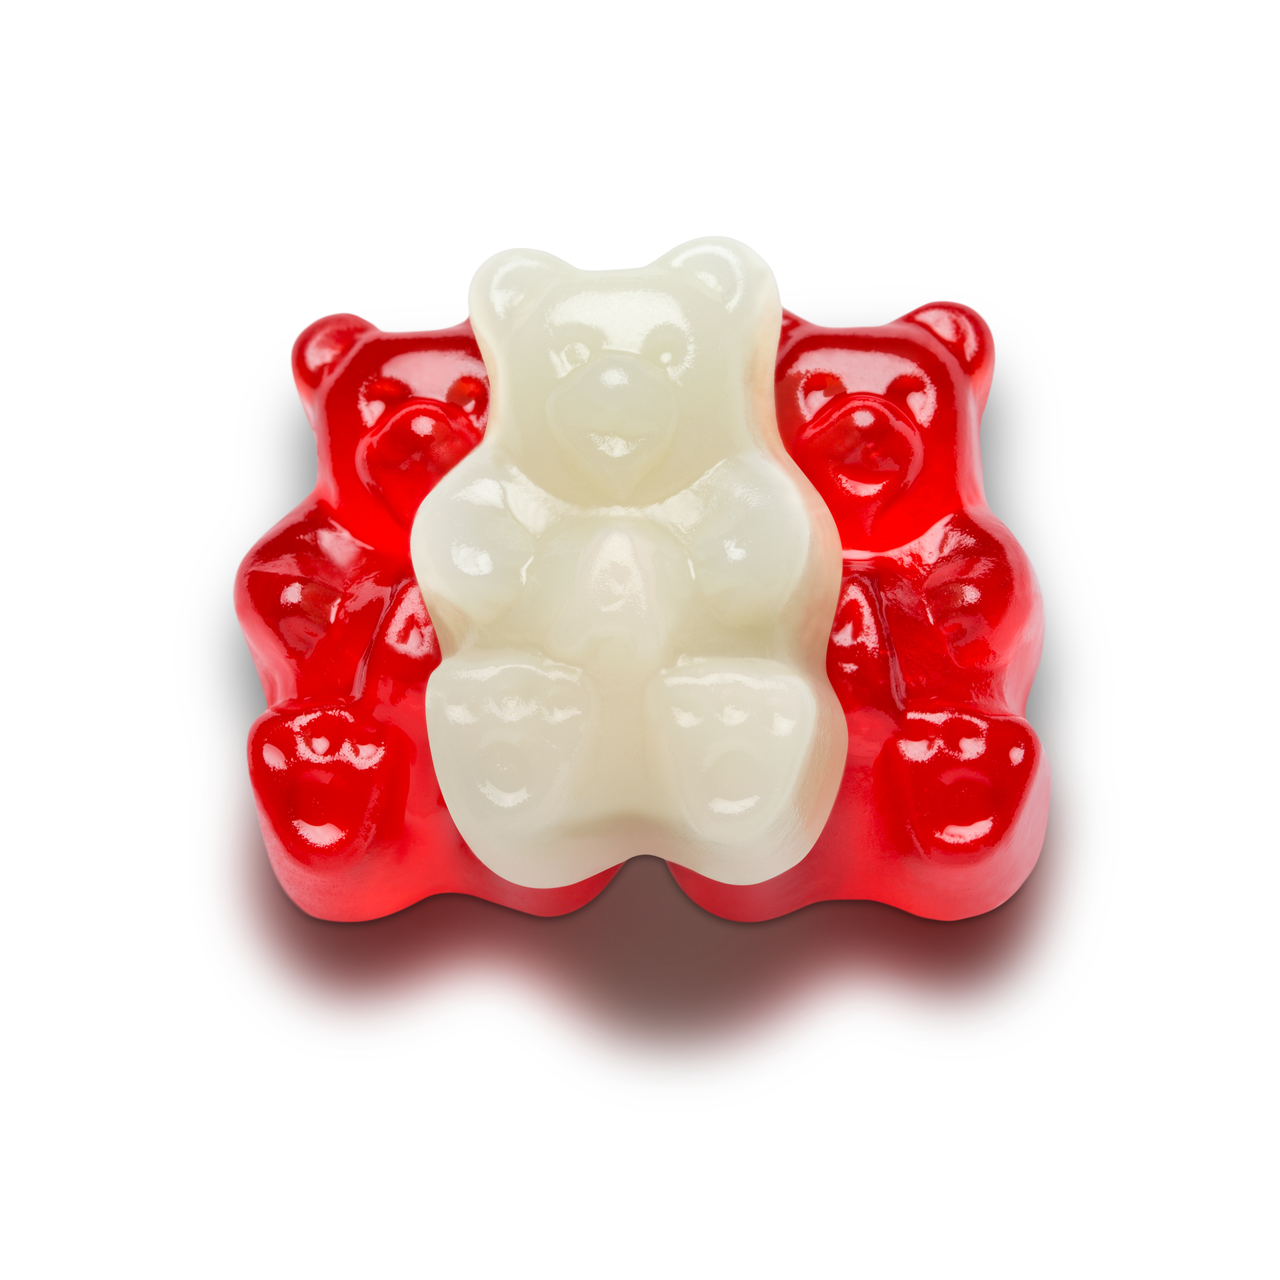 Red and White Valentine's Day Gummy Bears